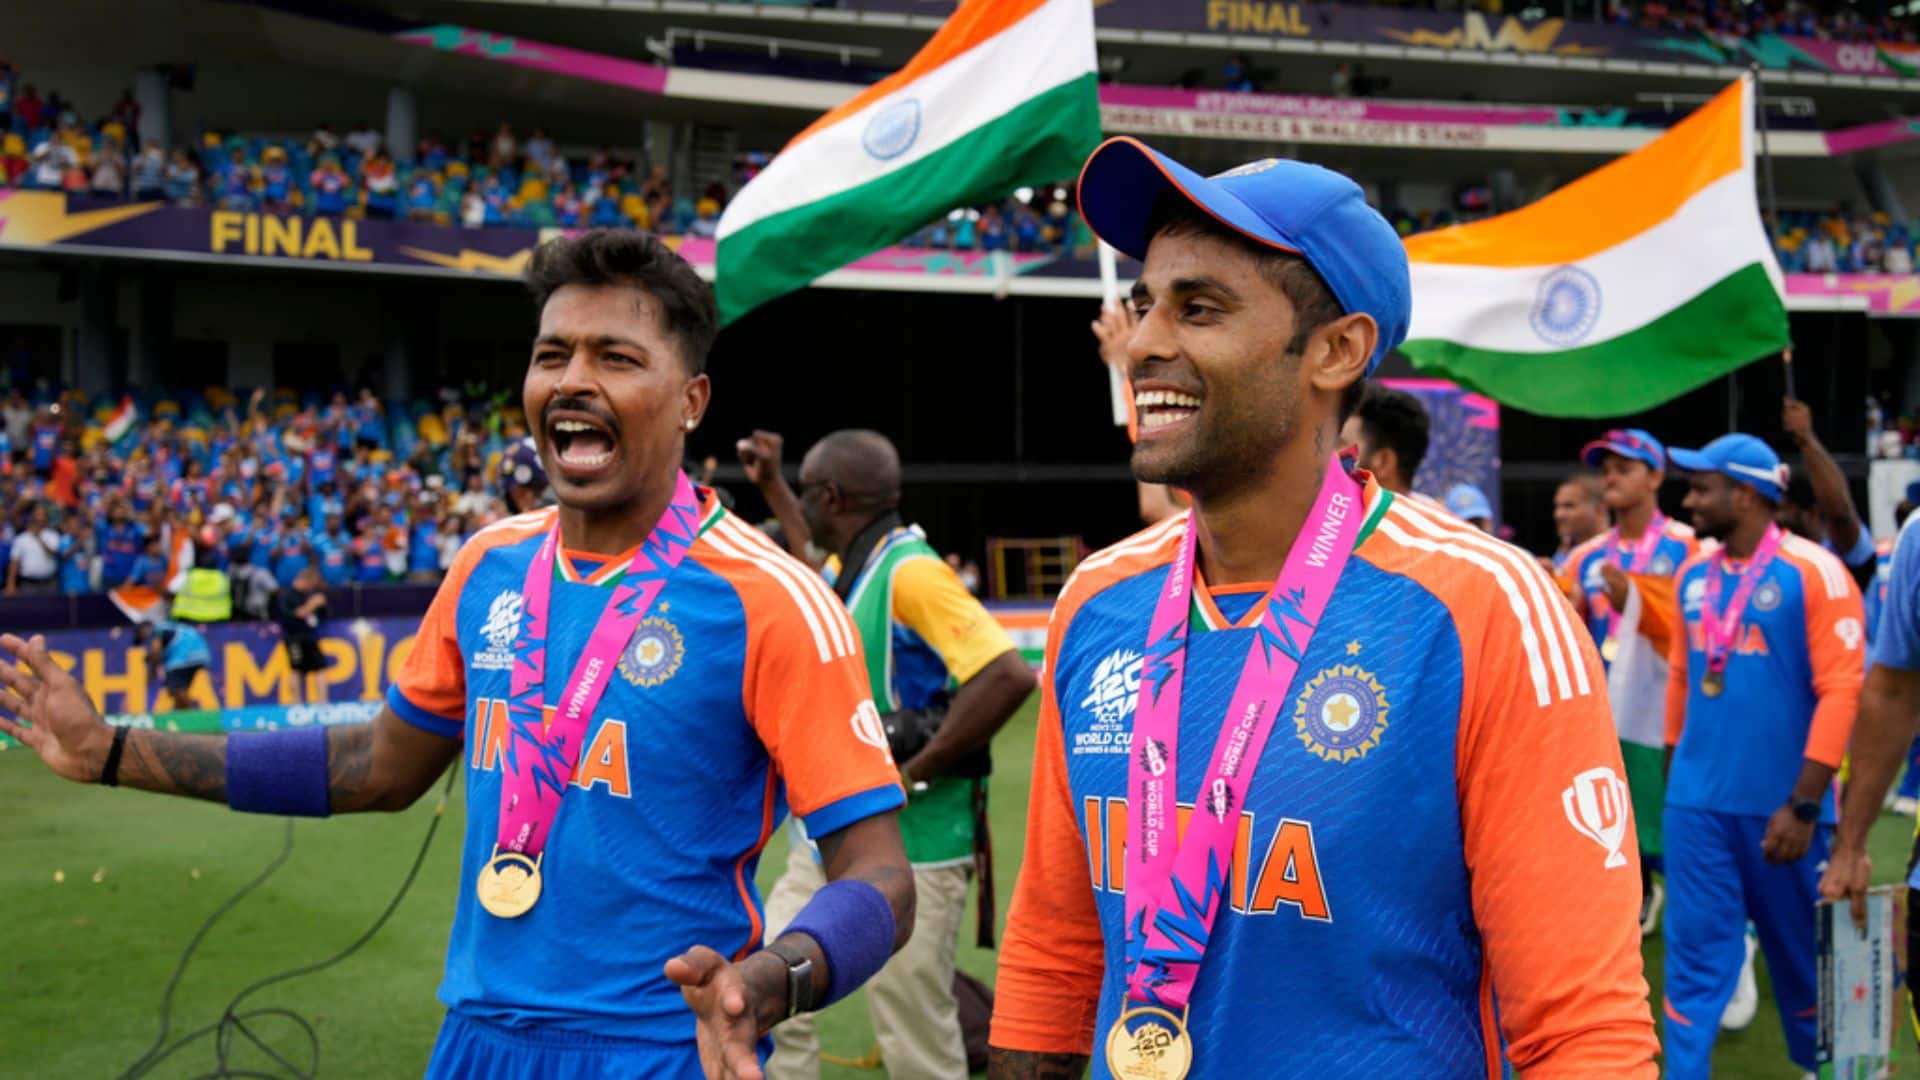 'Love Playing For My Country', Hardik Pandya Shares Patriotic Post After India's T20 WC Win